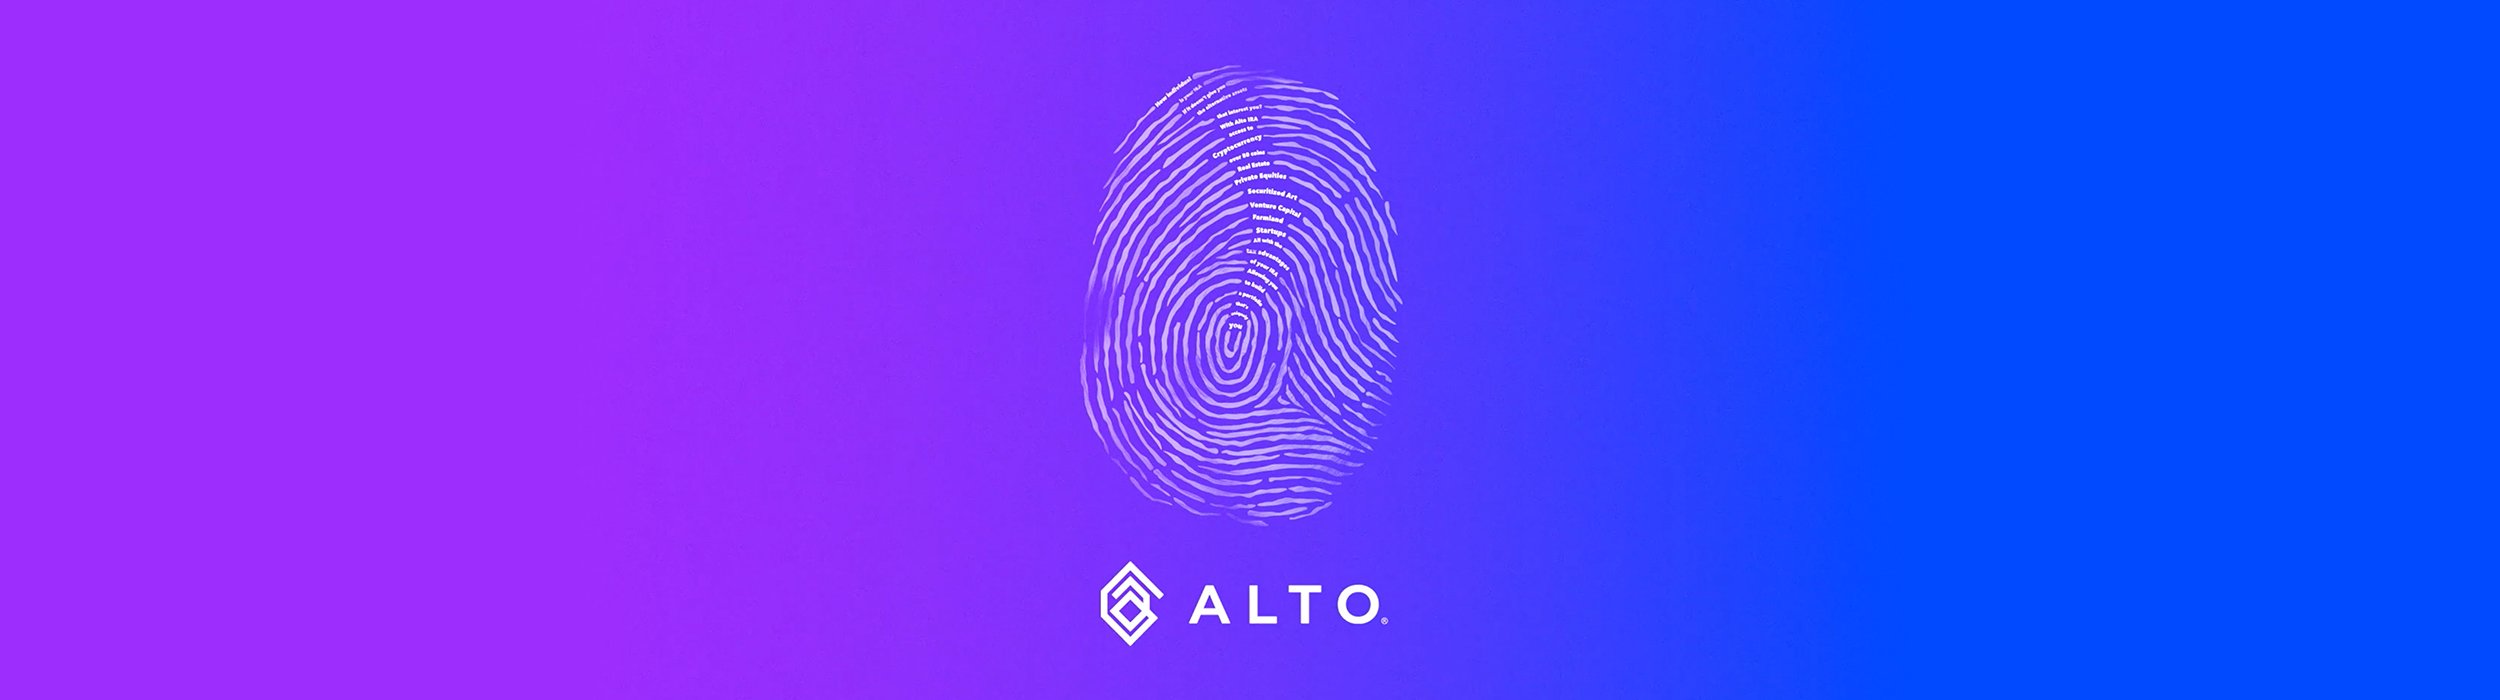 Alto Invests in Growth with National TV